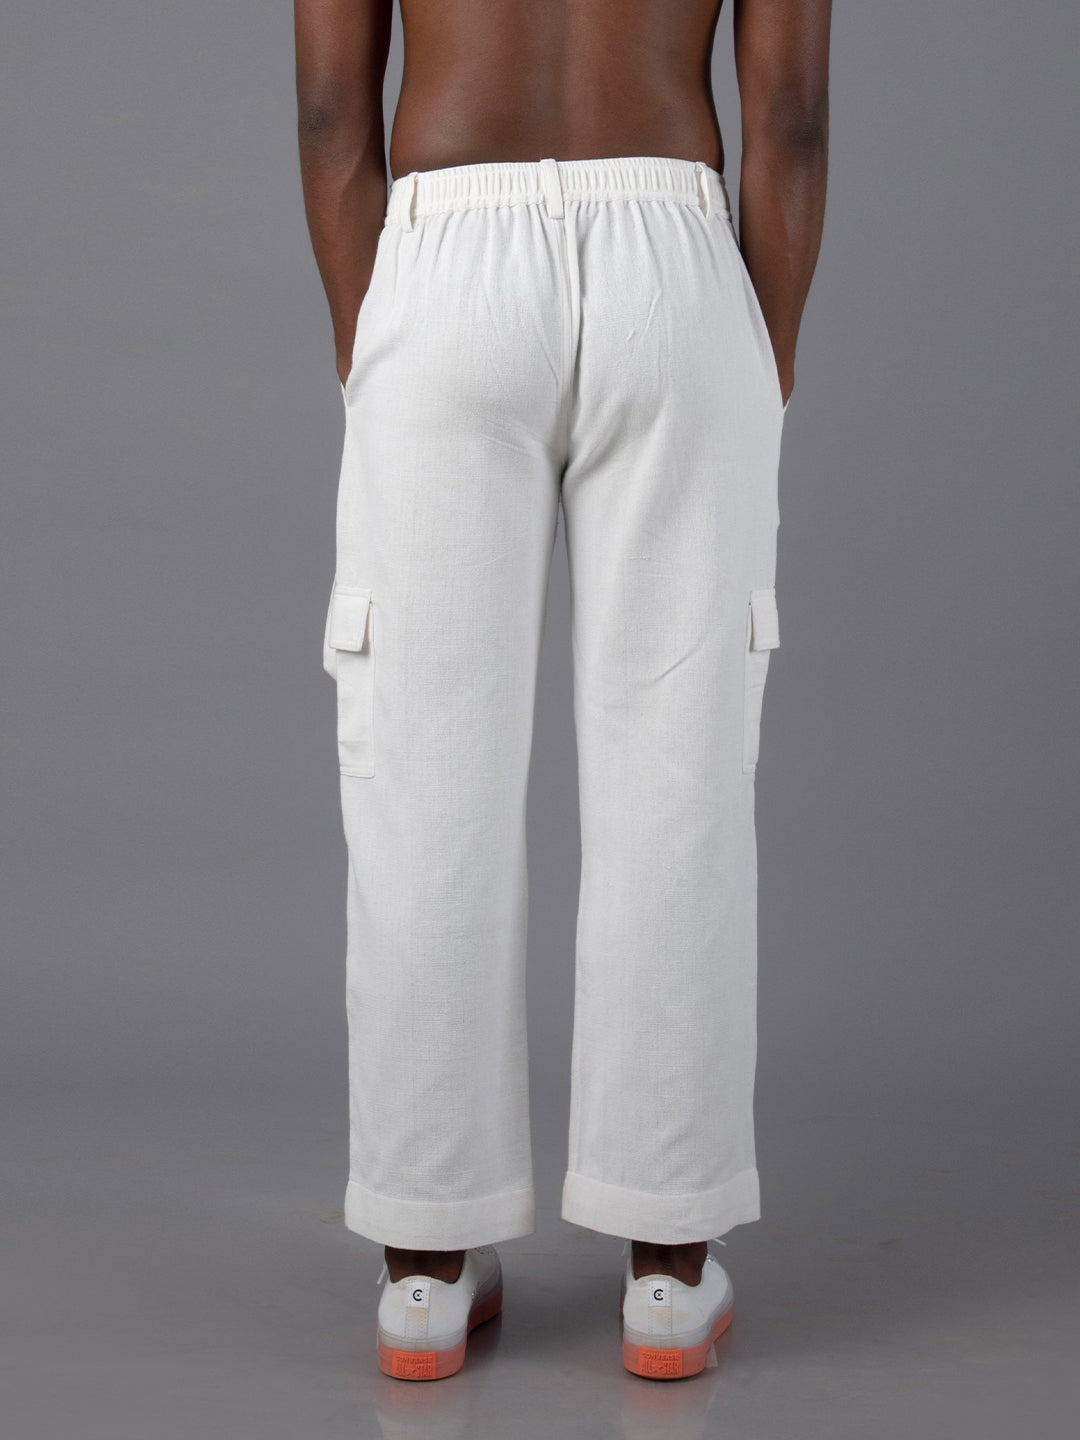 Buy TISTABENE White Solid Cotton Relaxed Fit Men's Cargo Pants | Shoppers  Stop